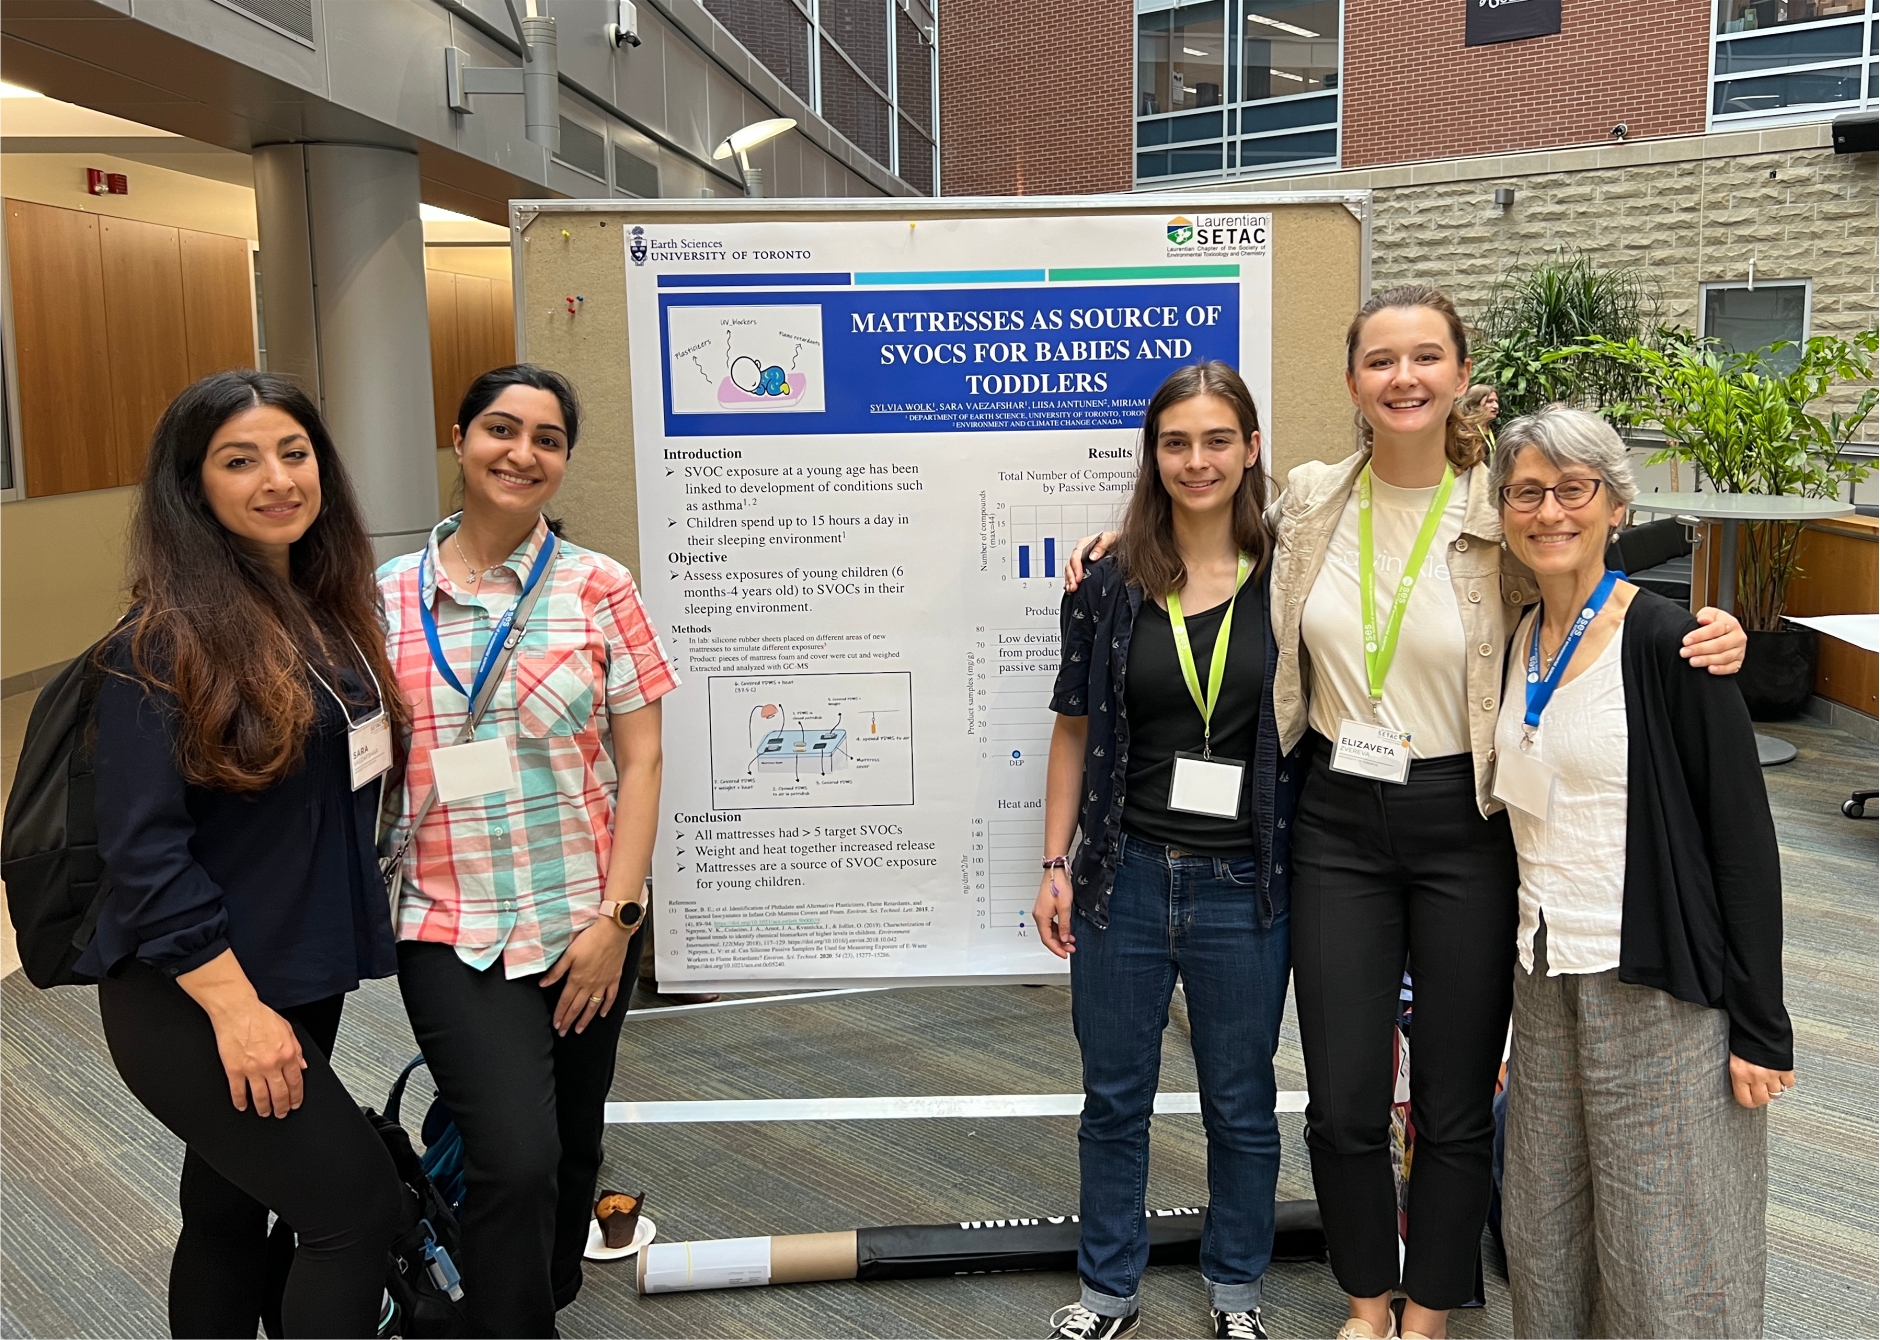 Members of the Diamond Lab posing beside a research poster during the Society of Environmental Toxicology and Chemistry (SETAC) Laurentian conference